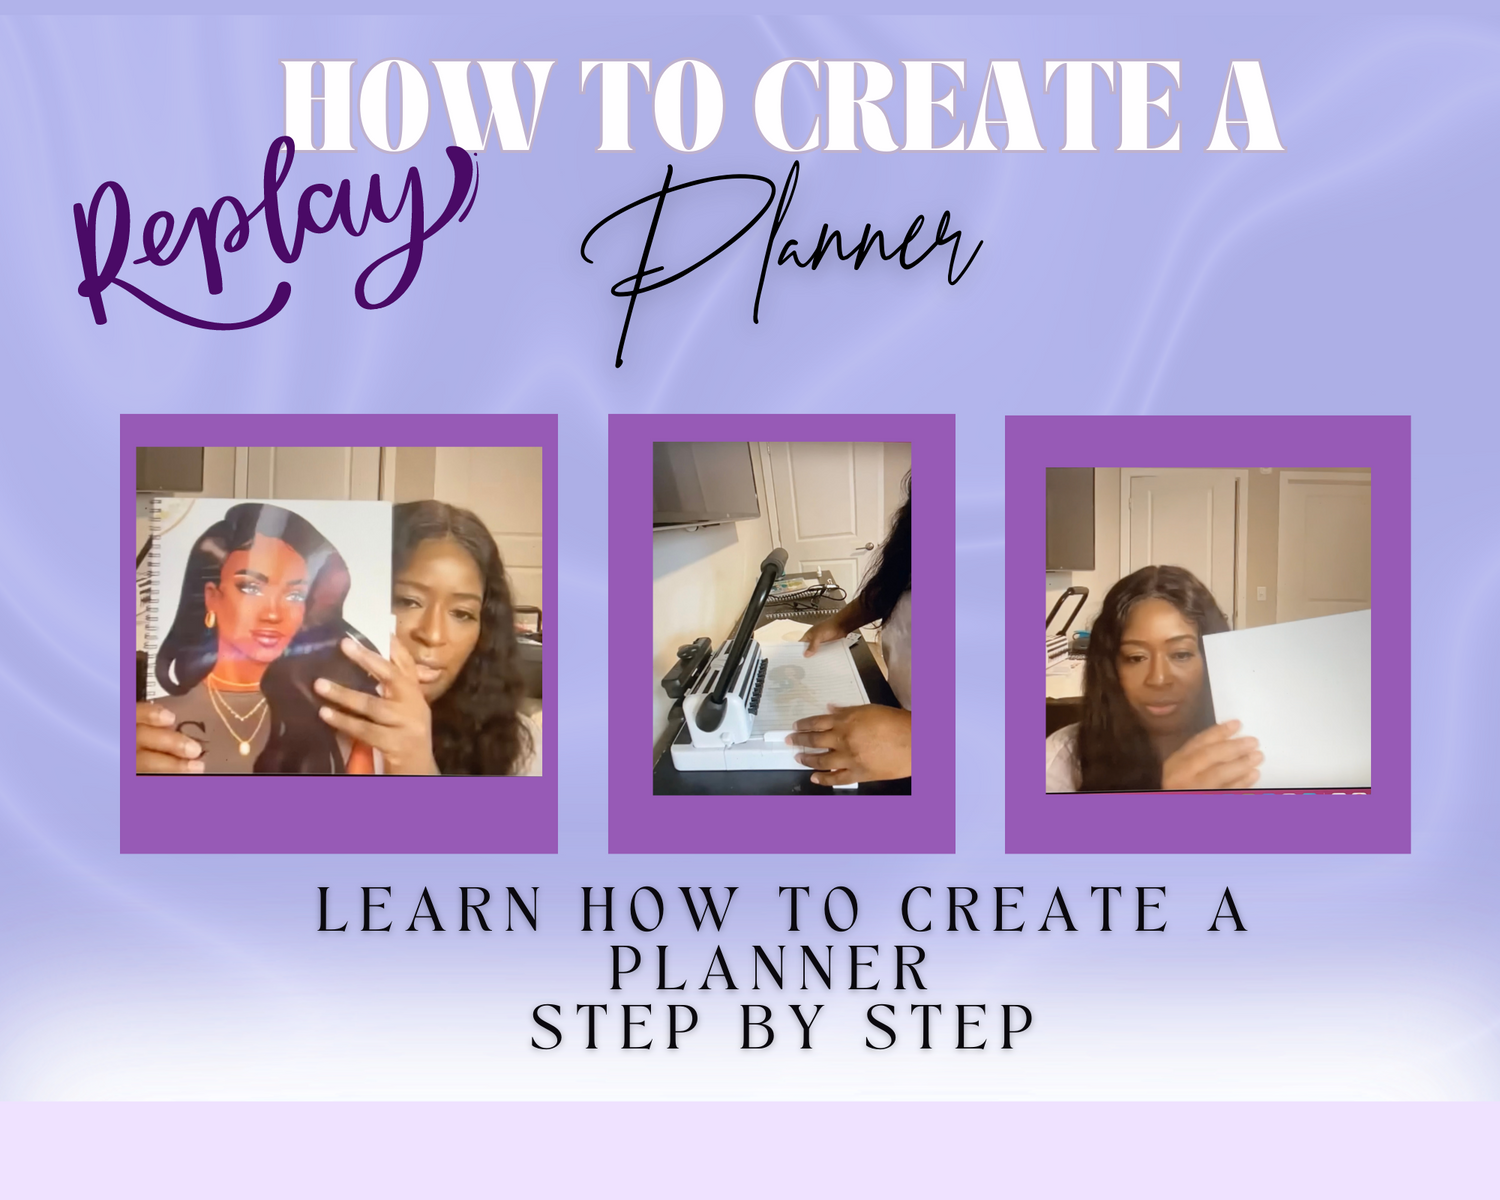 how-to-create-a-planner-replay-the-savvy-planning-chick